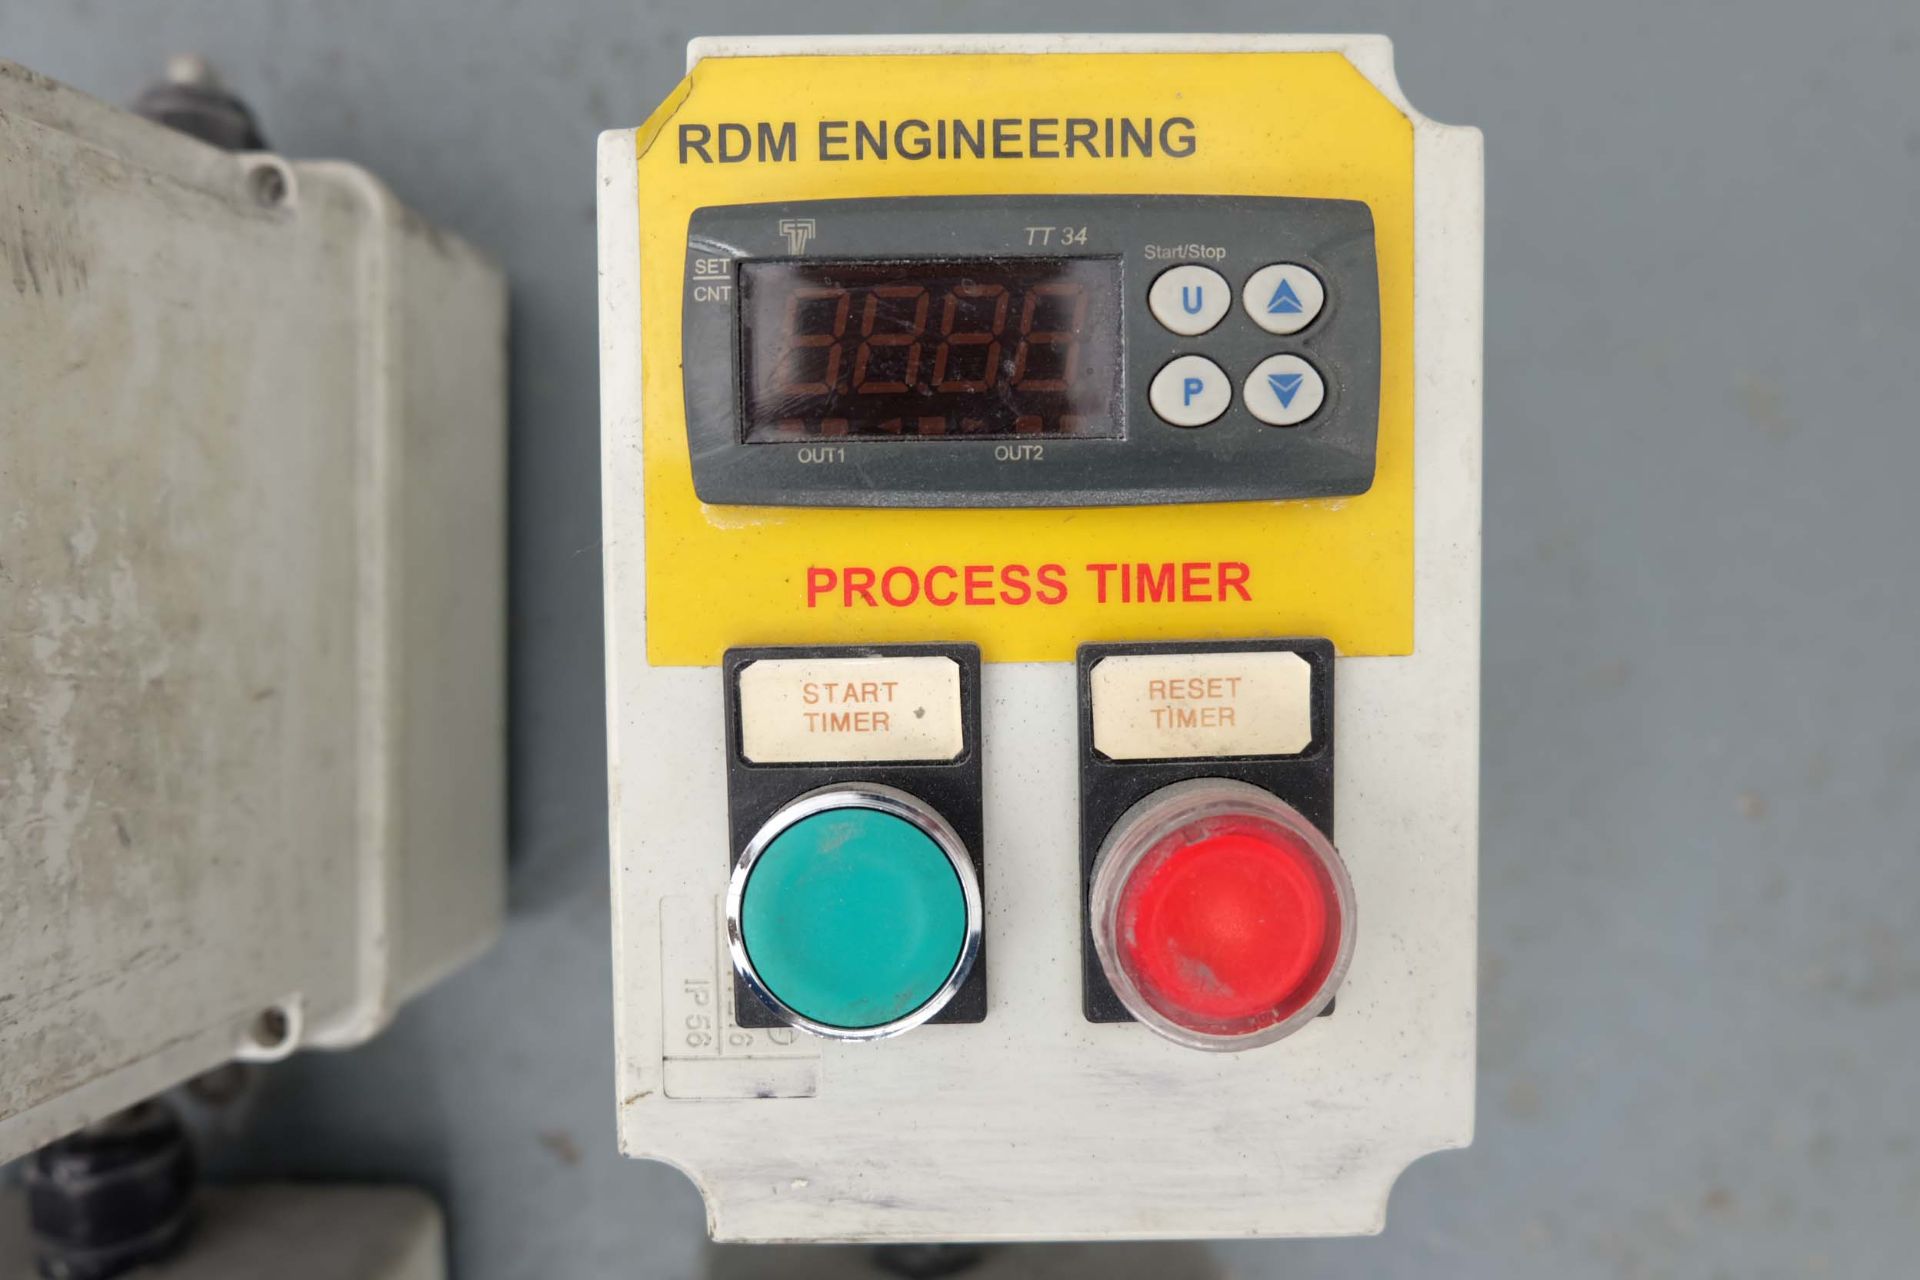 6 x RDM Engineering Digital Process Timer Control Boxes. - Image 2 of 2